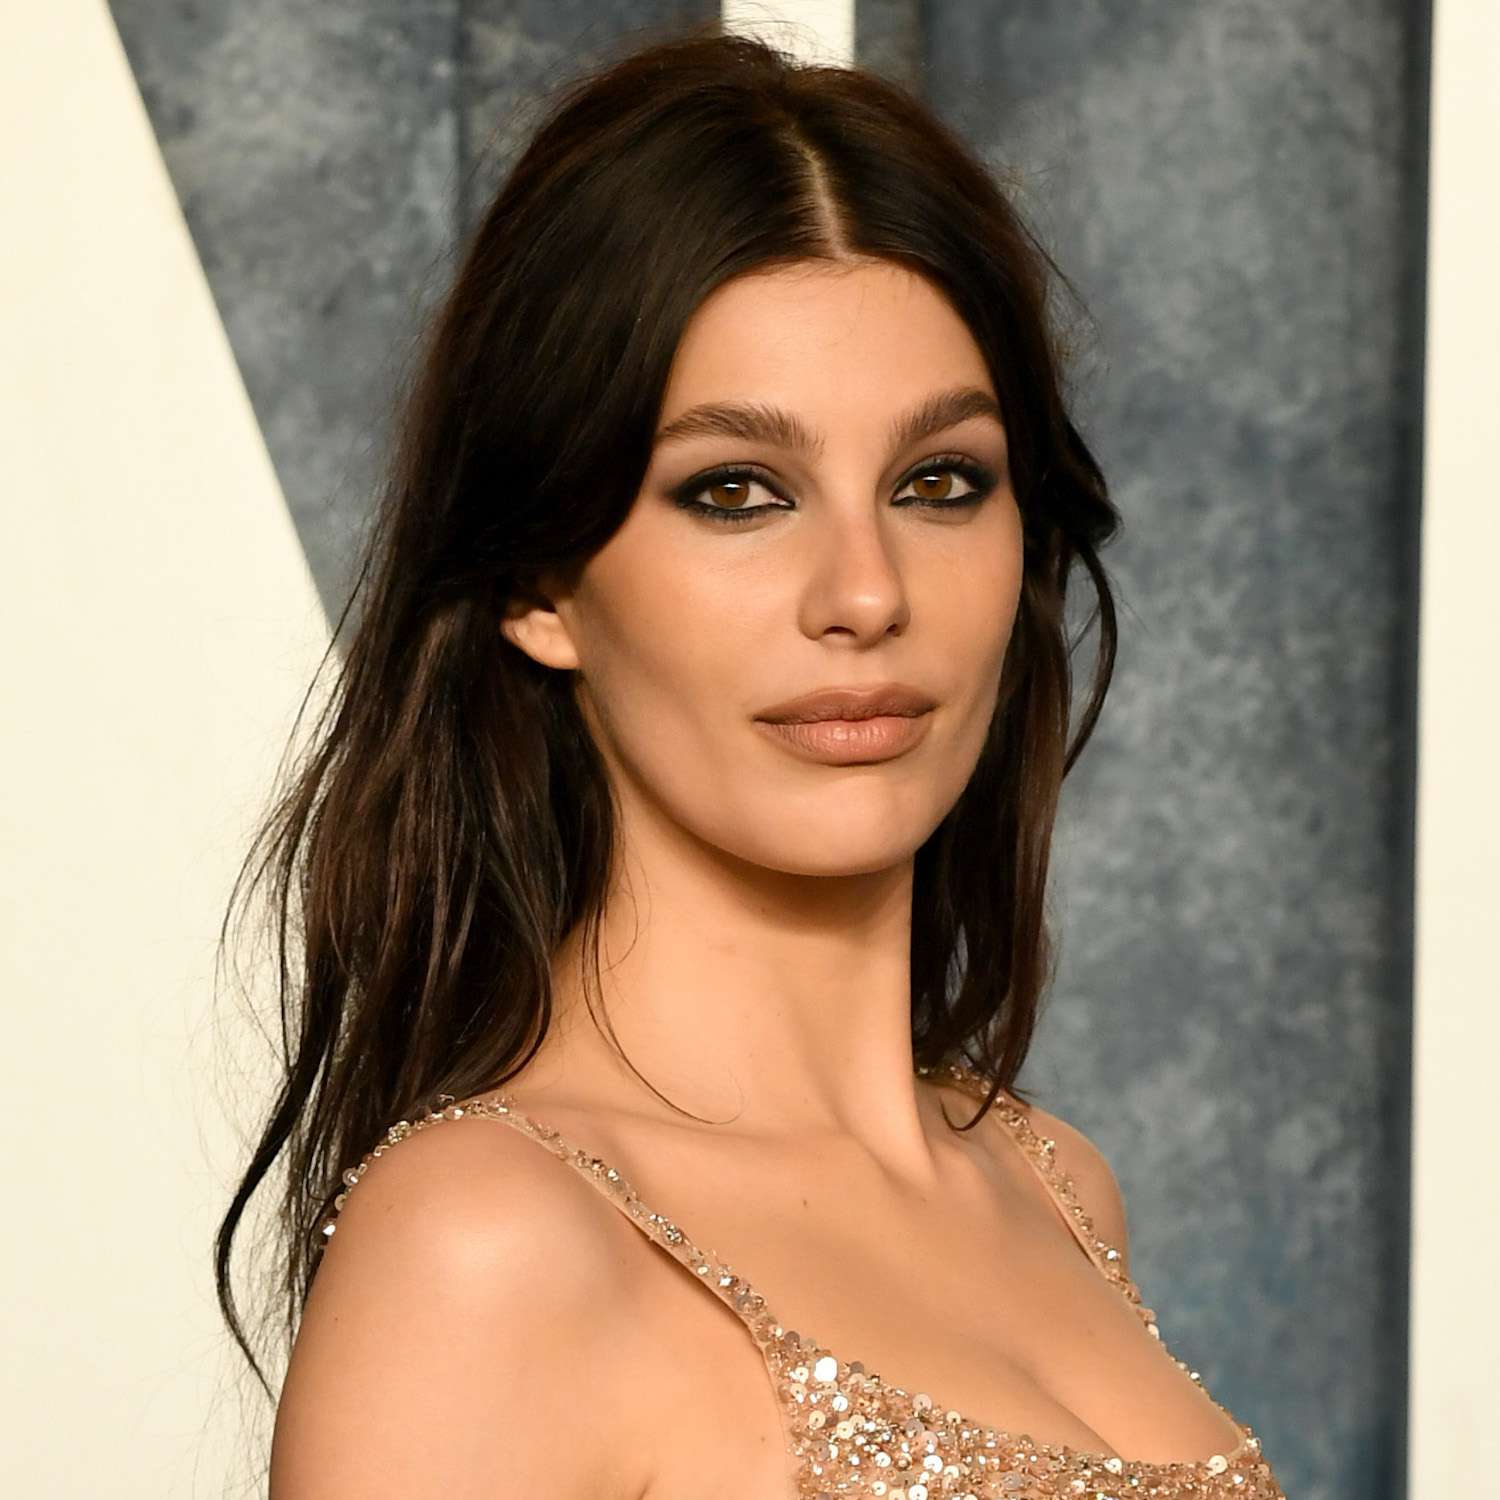 Camila Morrone wears a wavy hairstyle with a center part and face-framing layers